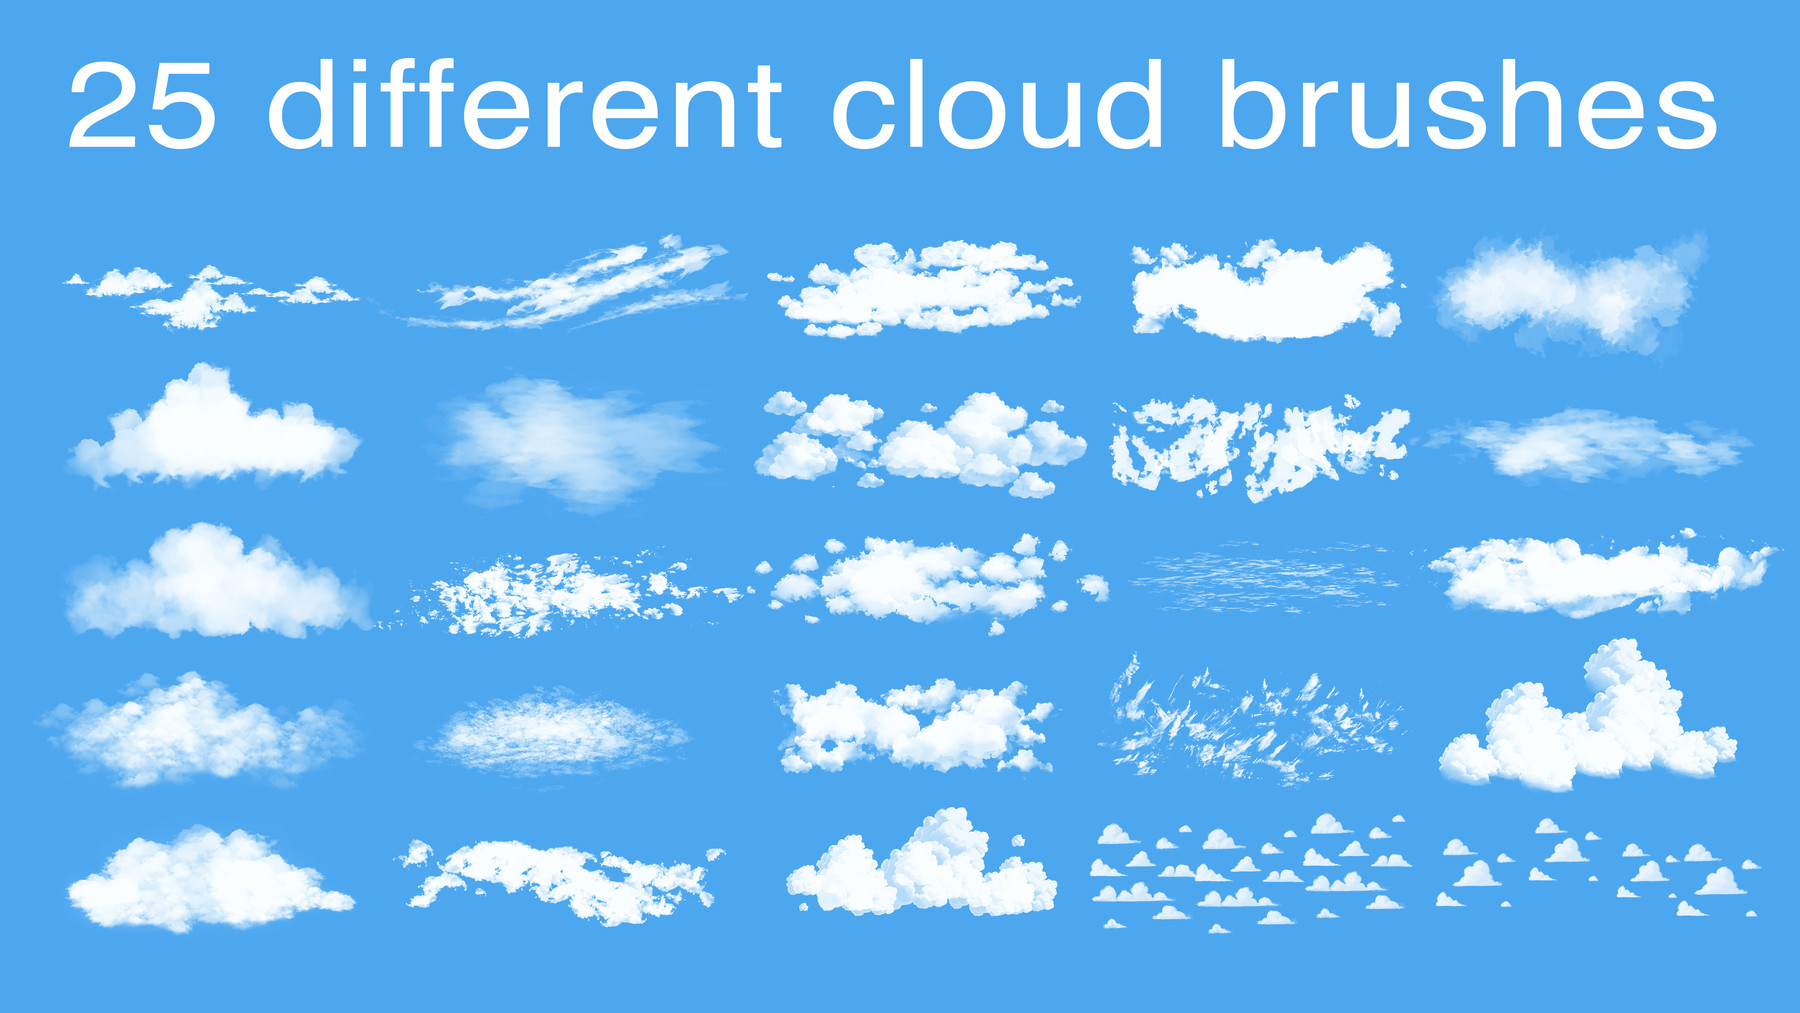 clouds illustrator brushes free download